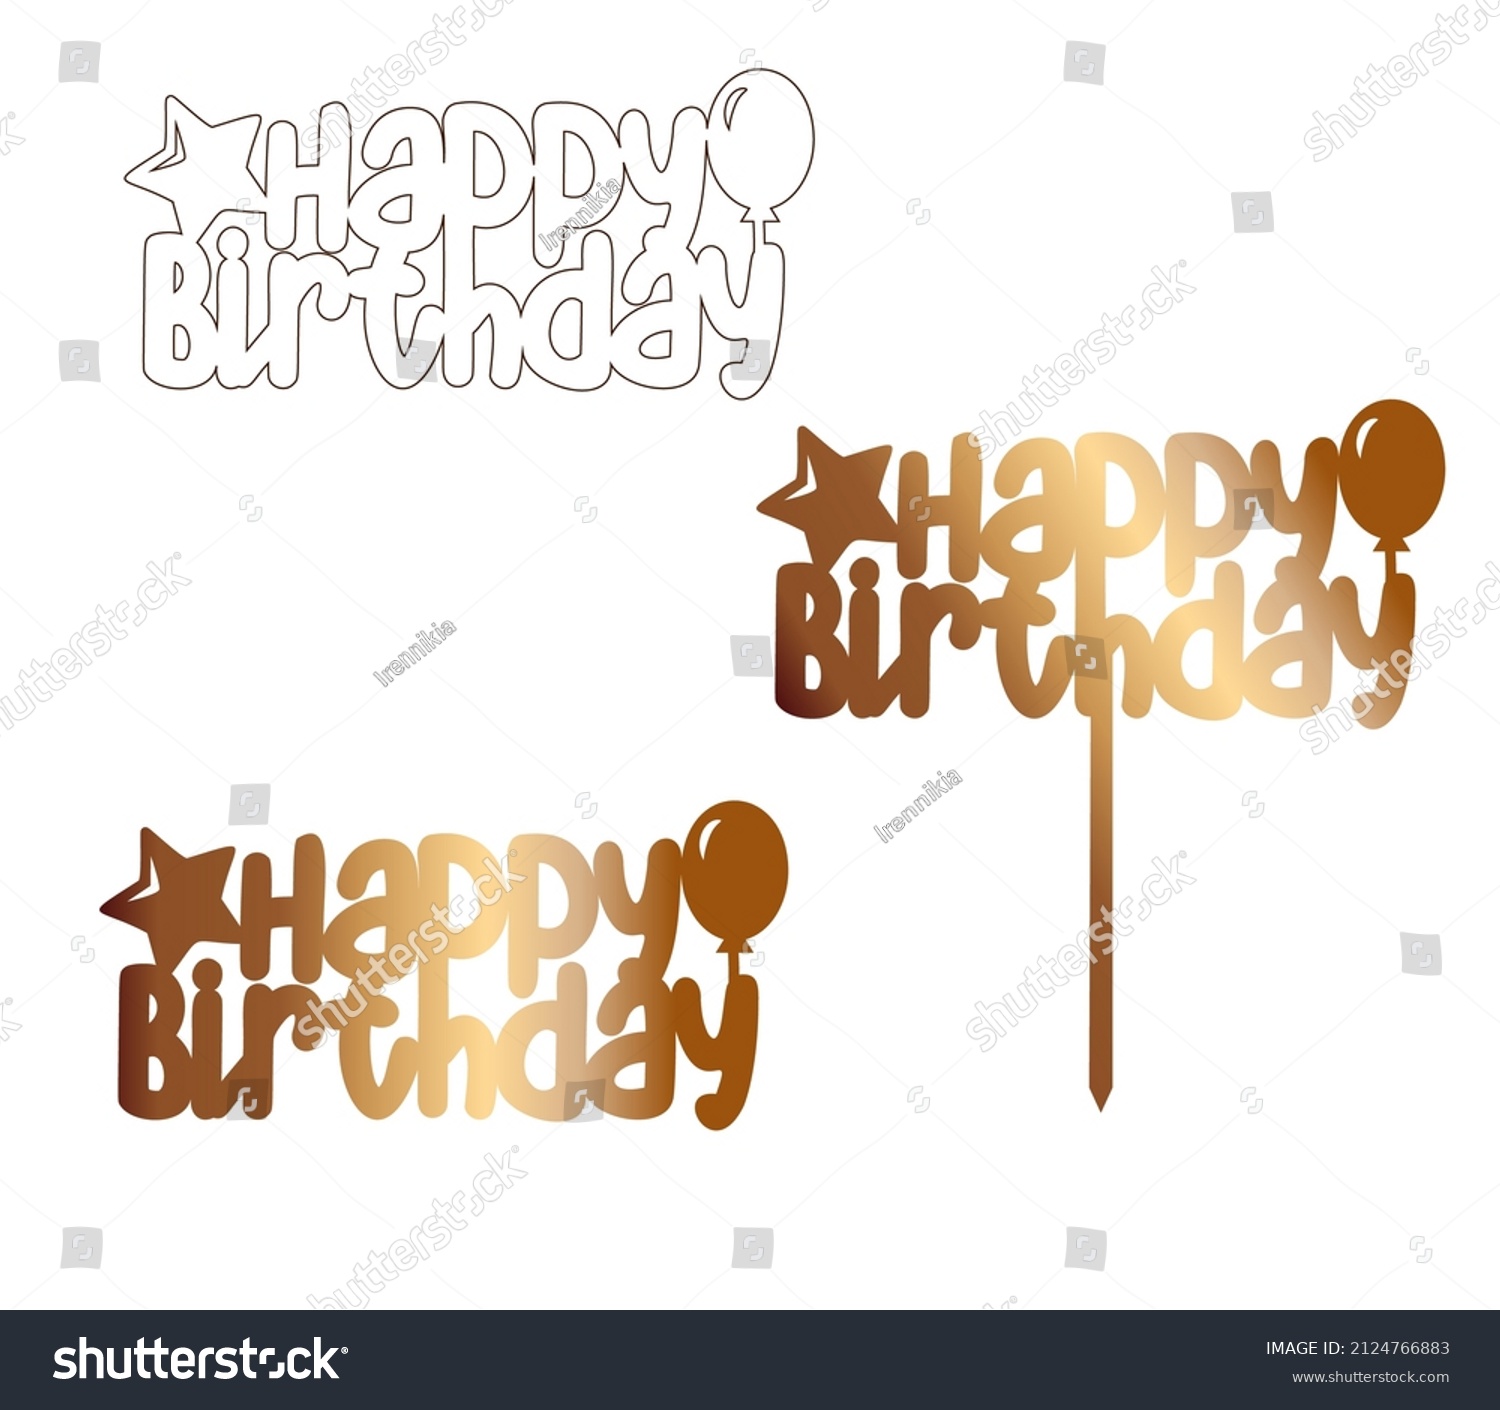 SVG of Happy birthday cake topper with balloon. Sign for laser cutting svg